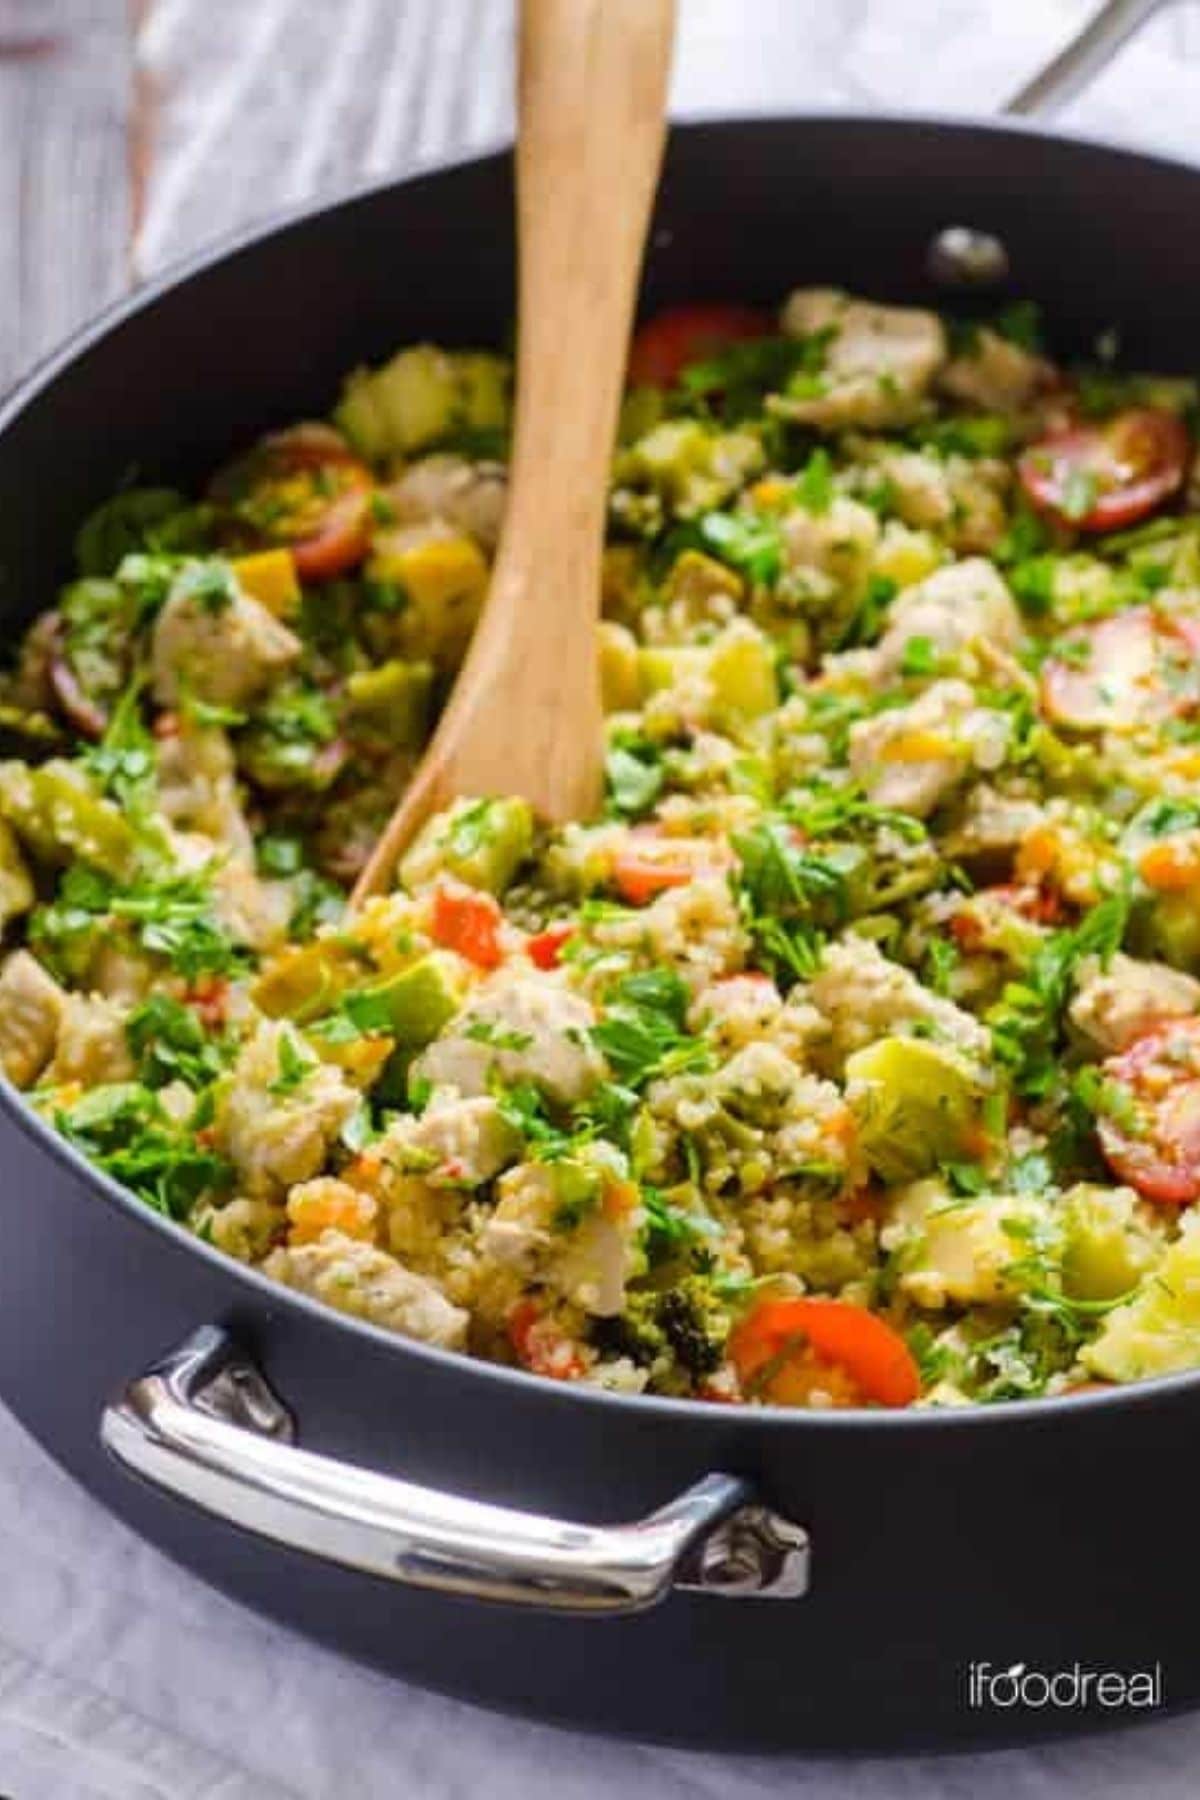 Black skillet filled with quinoa and vegetables